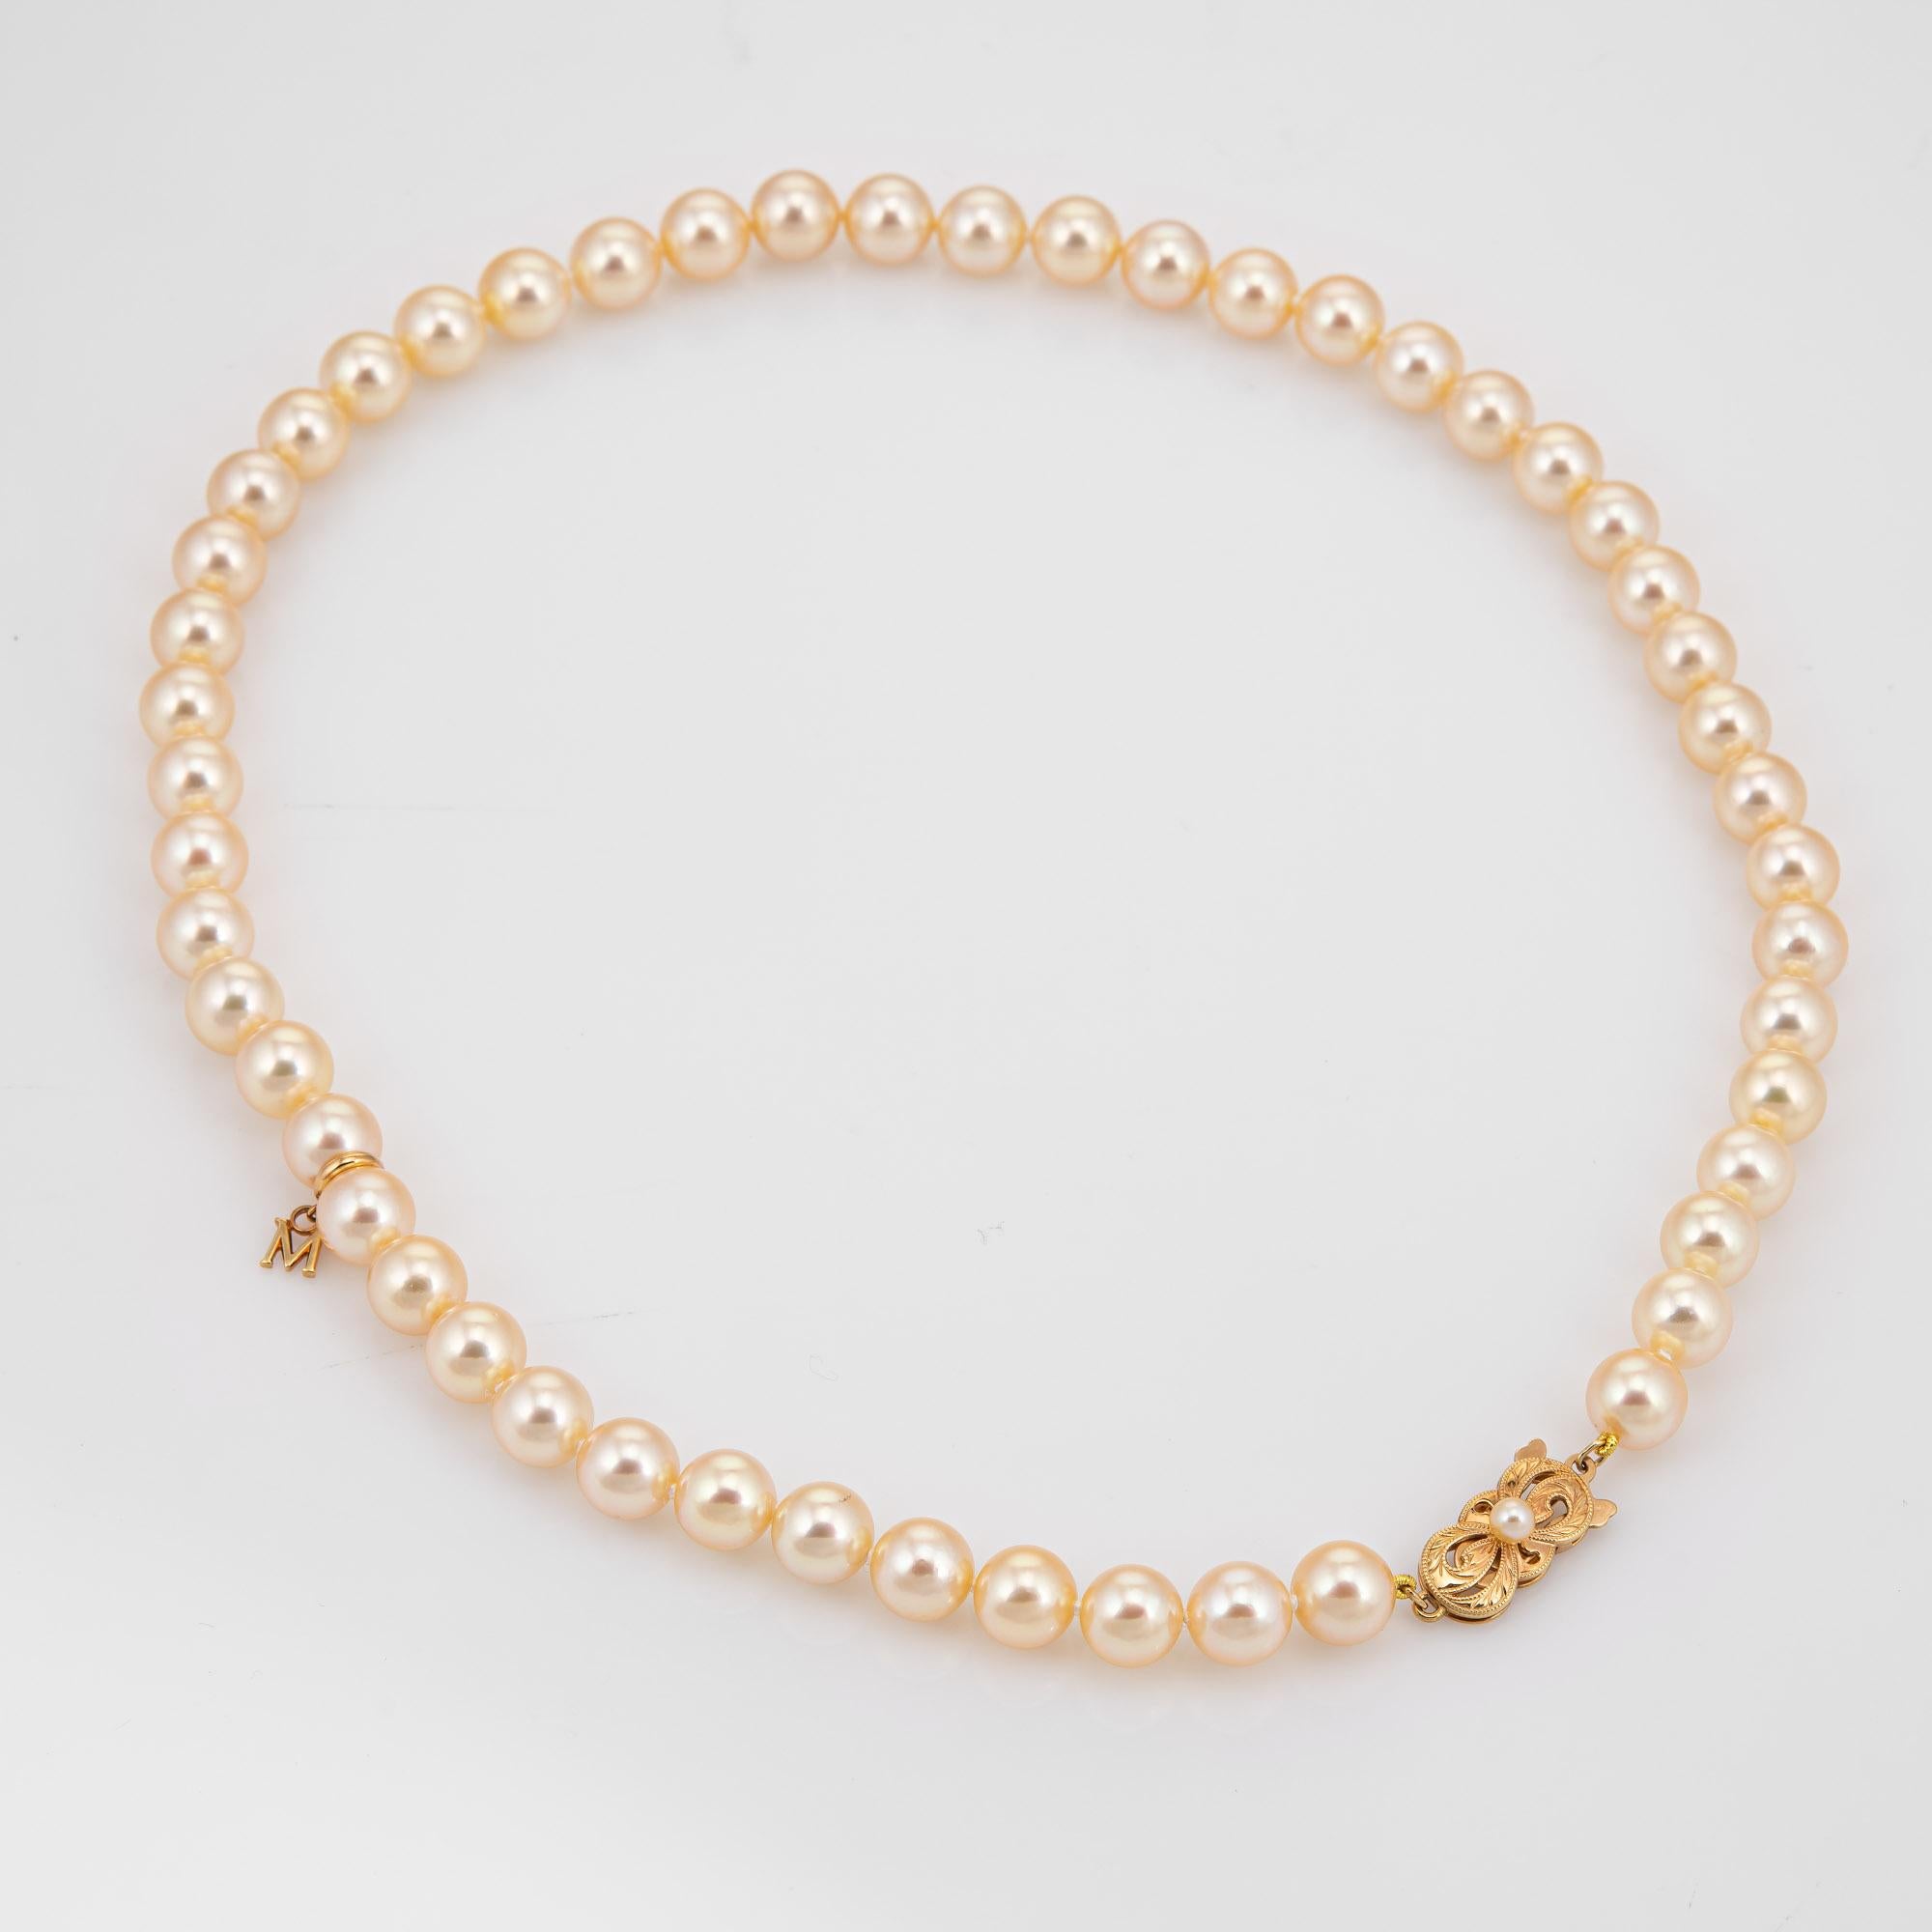 Contemporary Mikimoto 8mm Golden Akoya Pearl Necklace 17